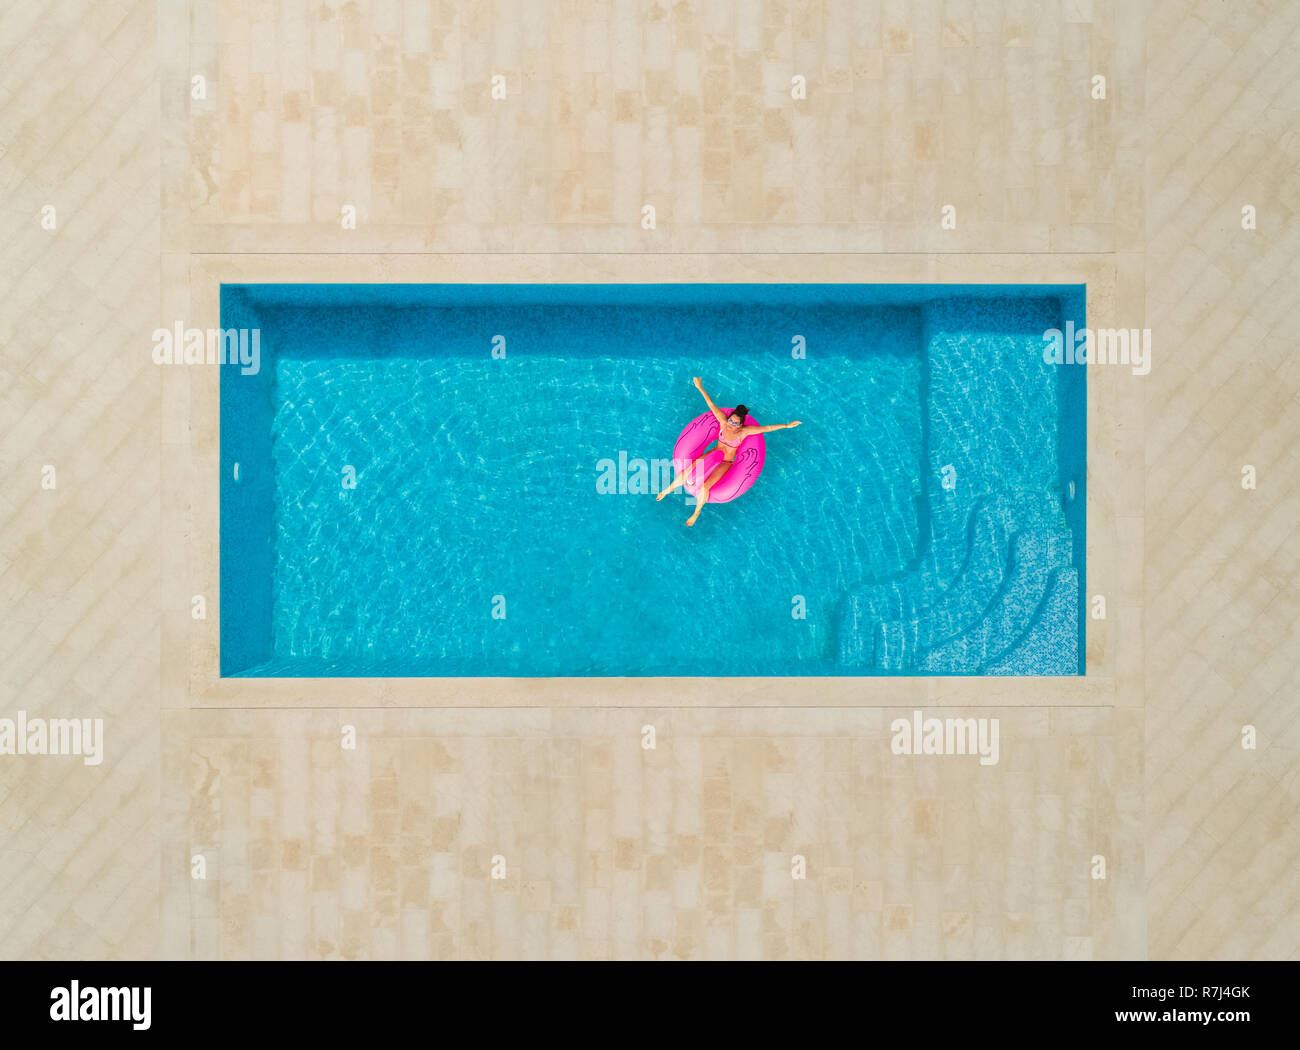 Aerial view of woman on a inflatable flamingo mattress in swimming pool. Stock Photo